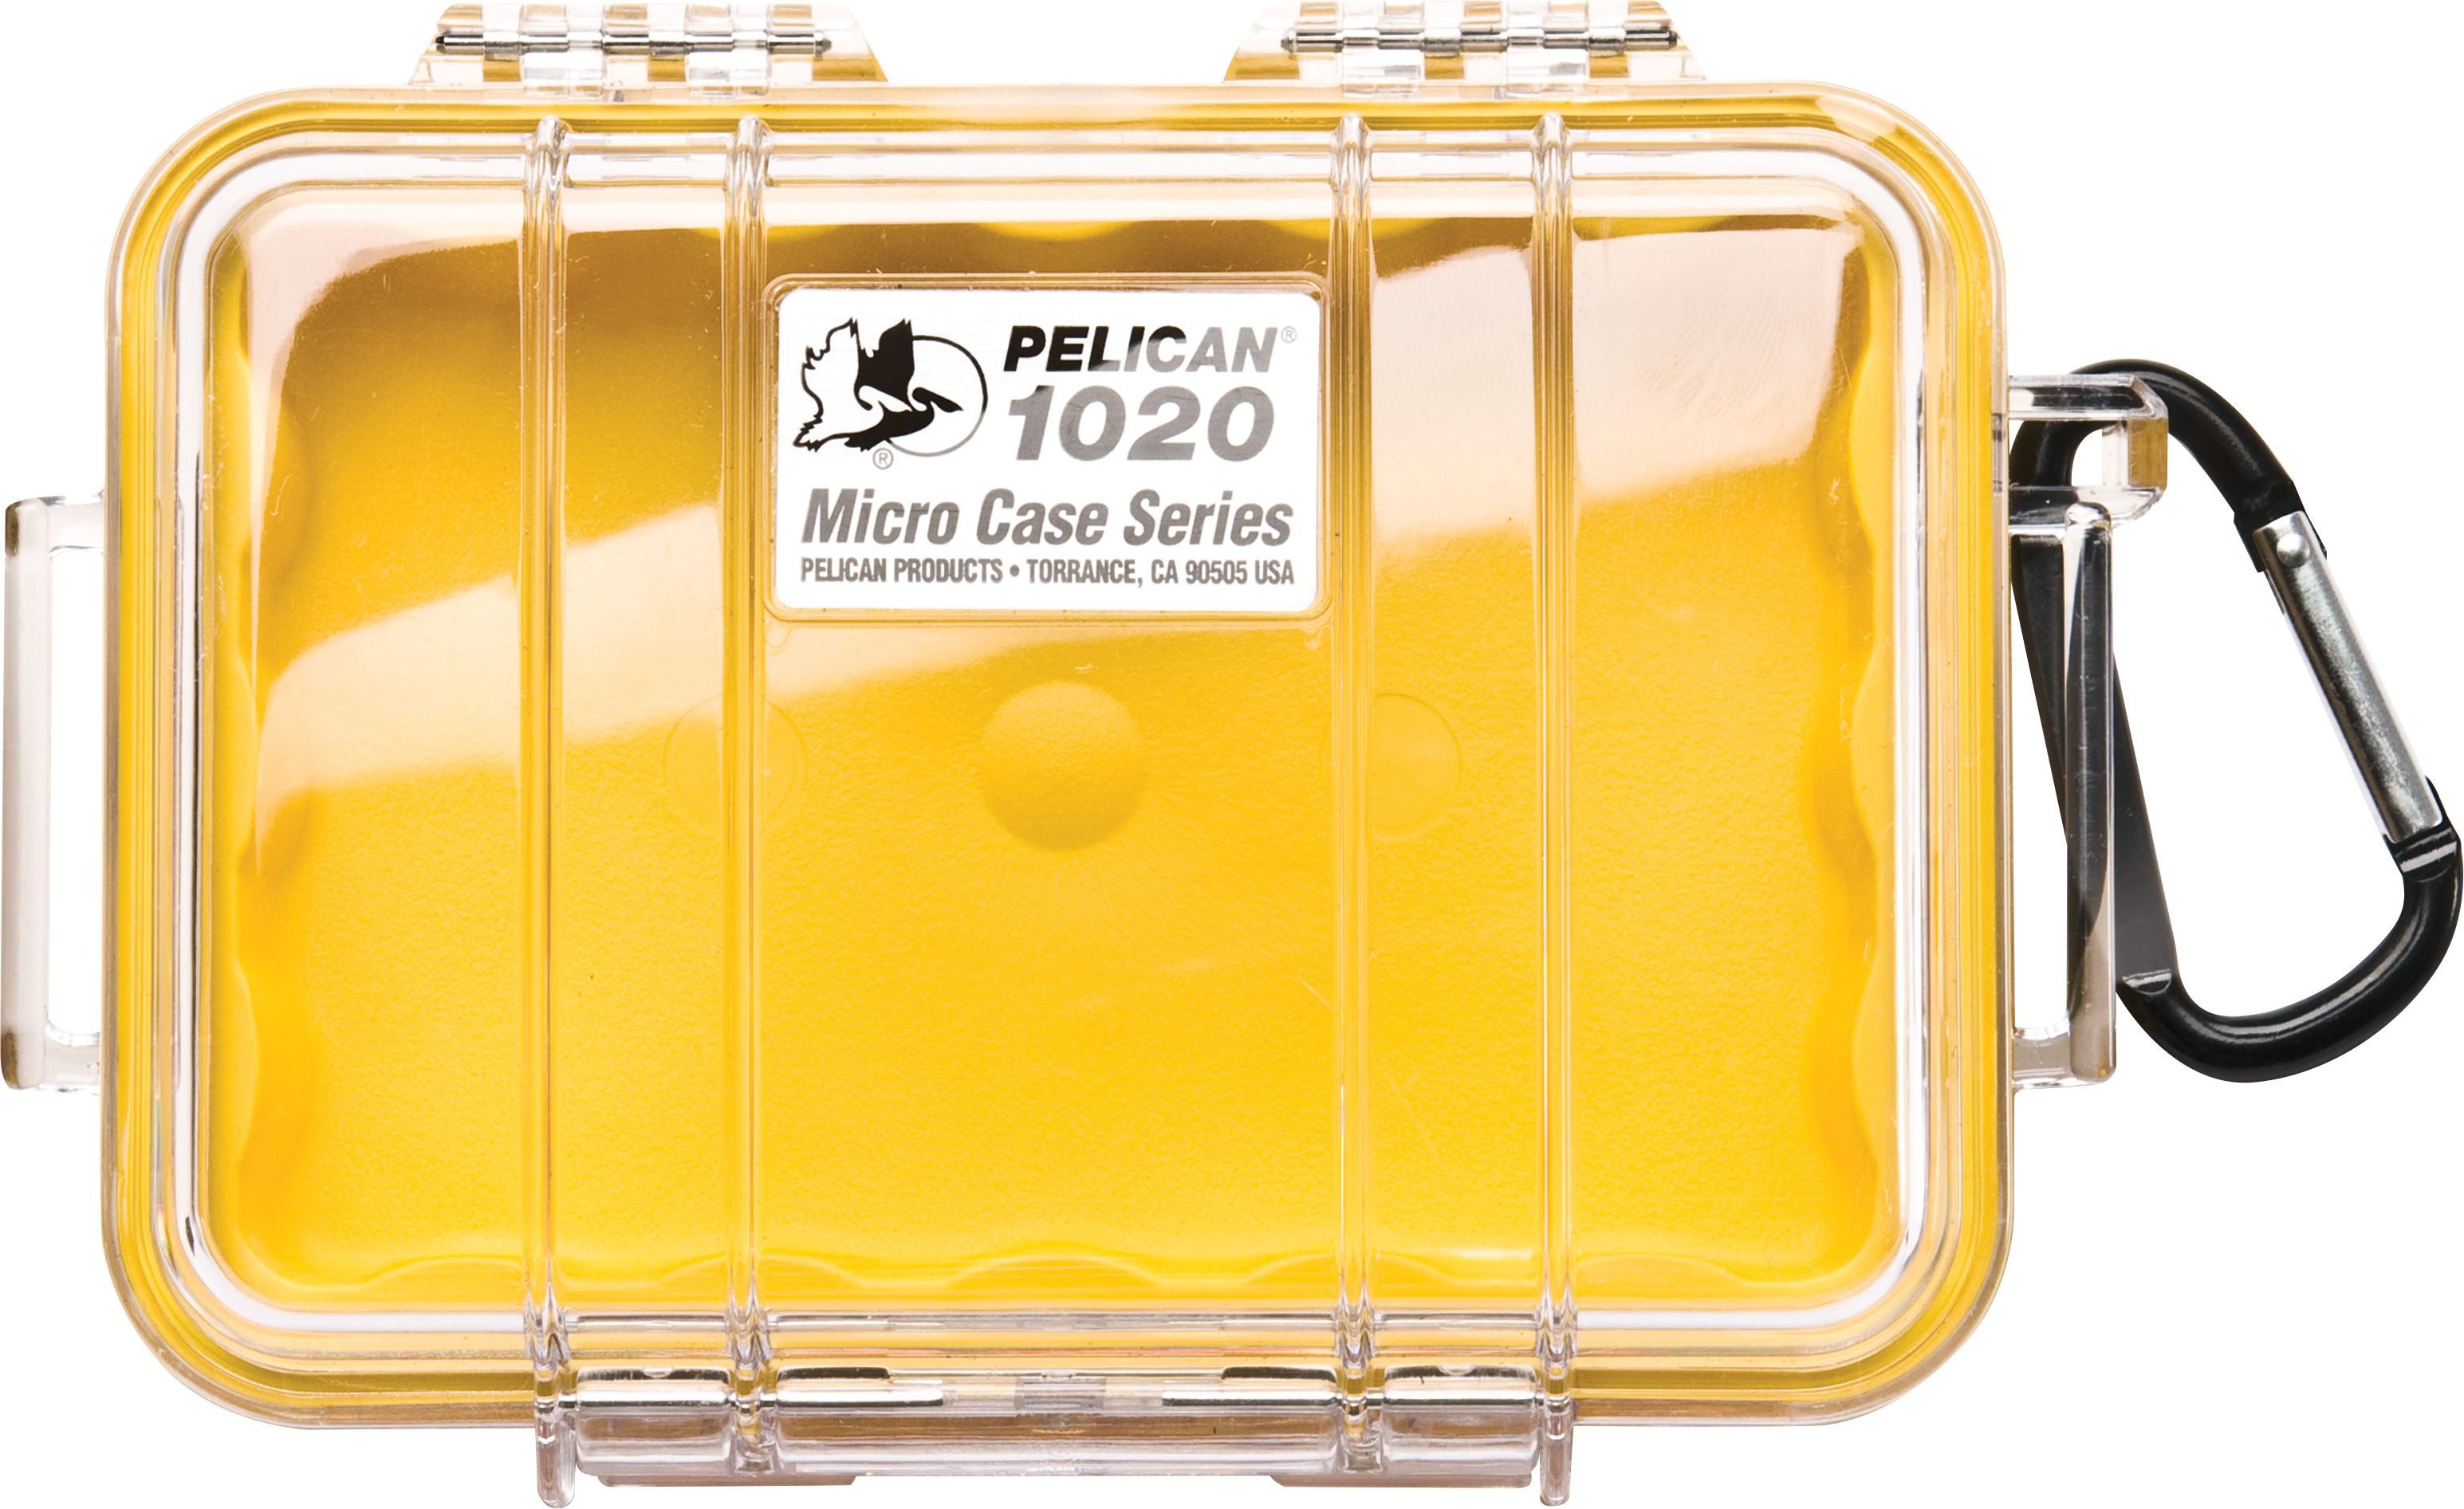 Pelican 1020 Micro Case Series Dry Boxes | Up to 25% Off 5 Star